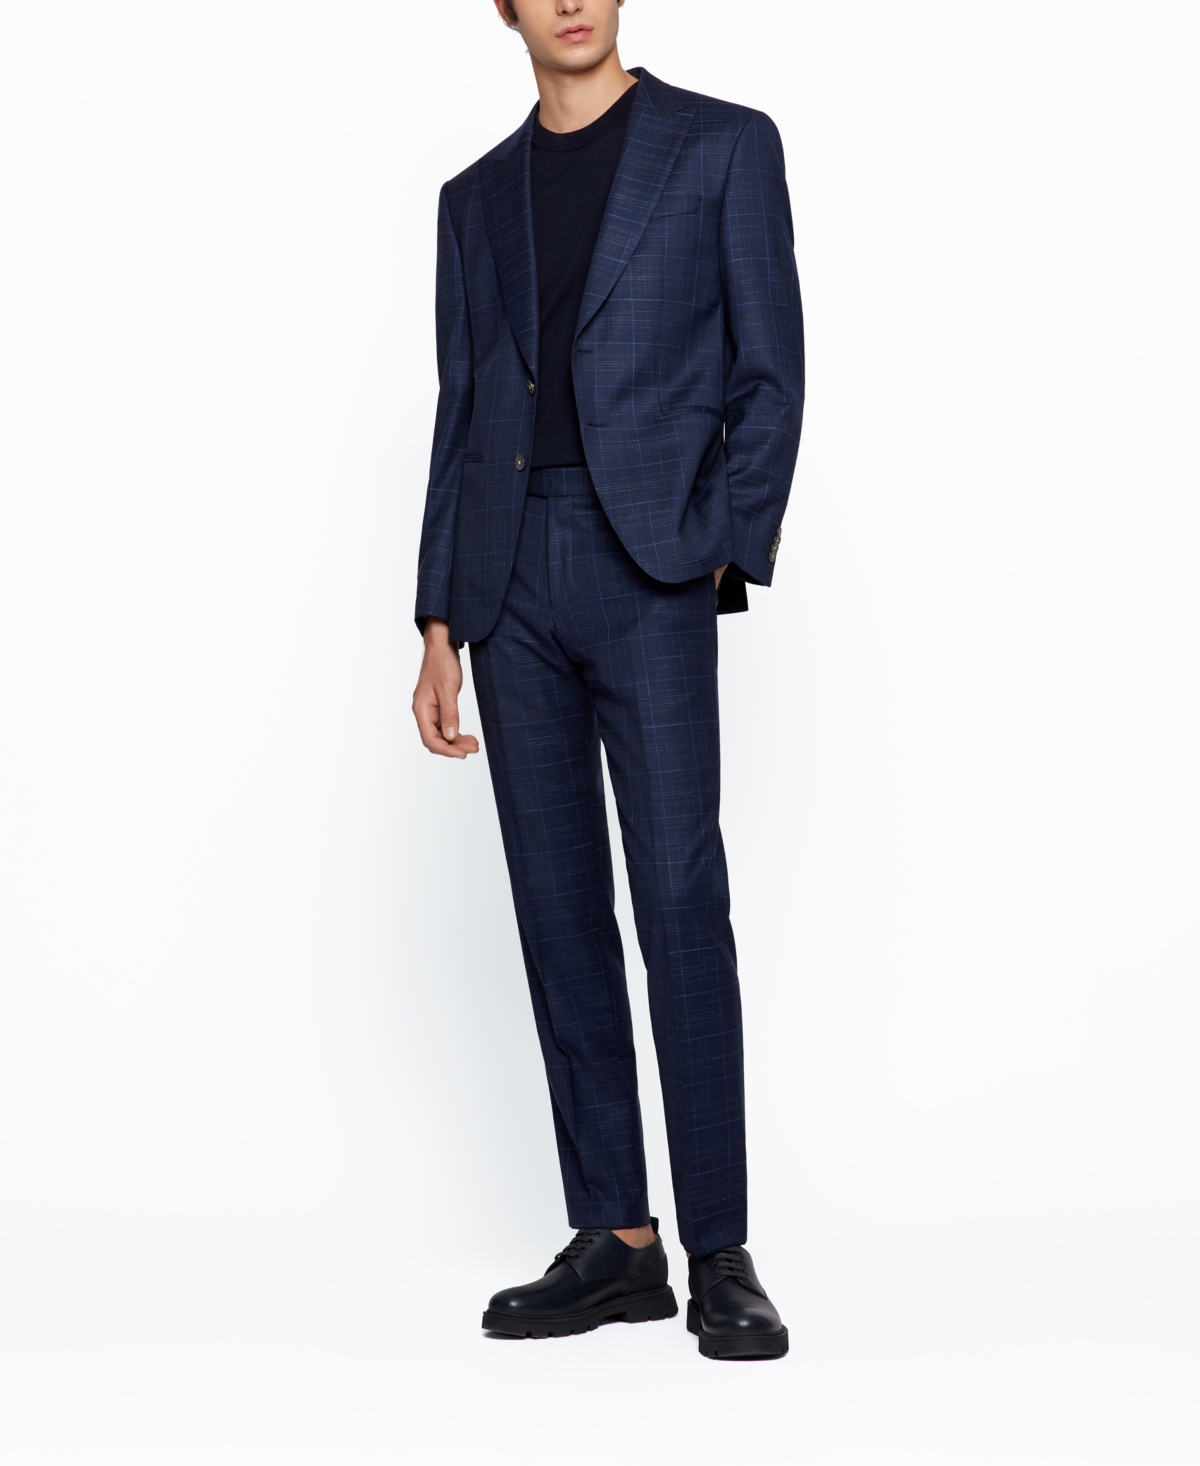 Men's HUGO BOSS Suits On Sale, Up To 70% Off | ModeSens